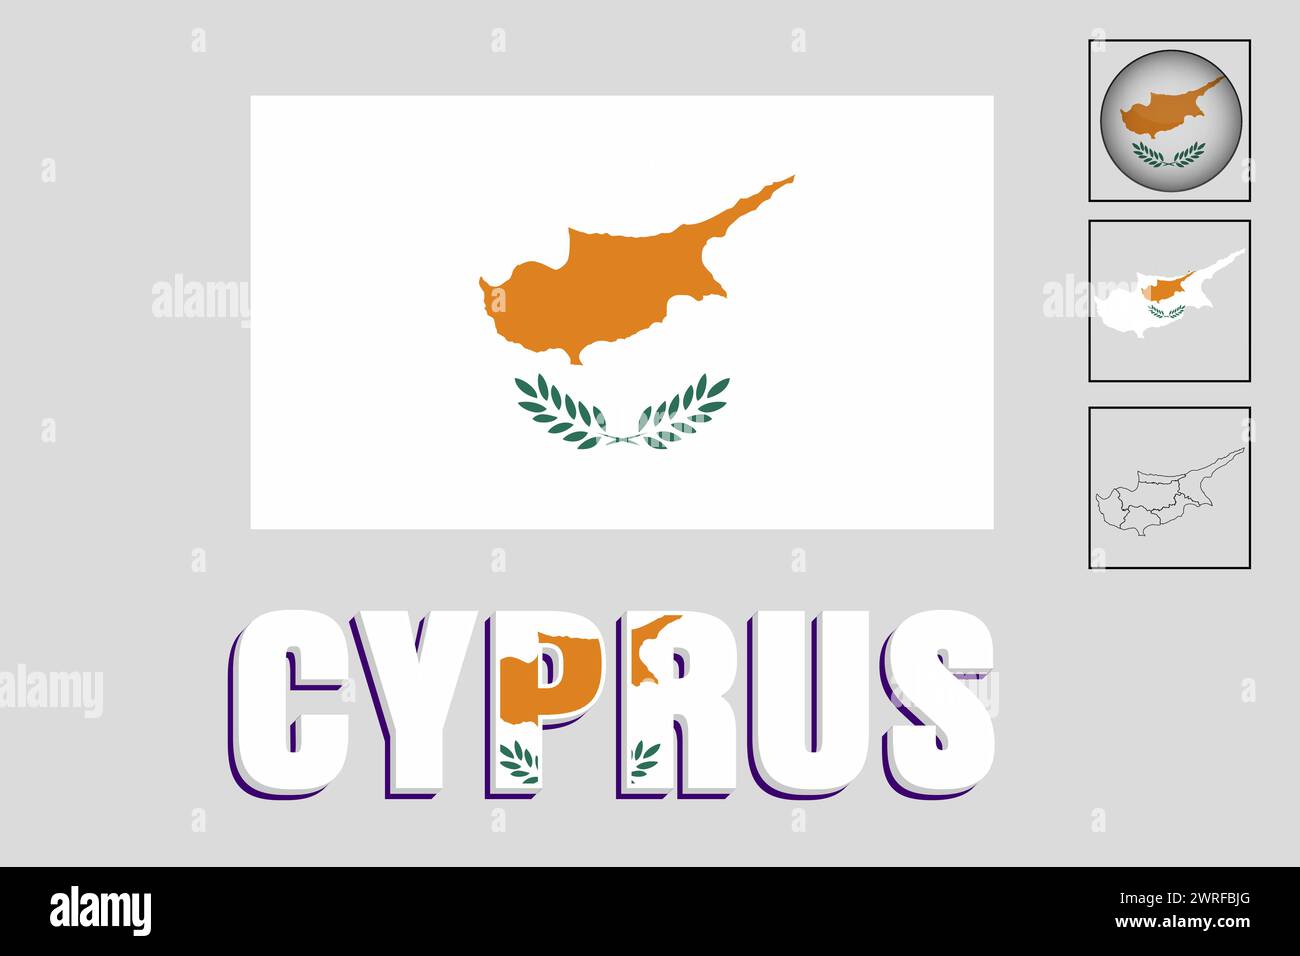 Cyprus flag and map in vector illustration Stock Vector